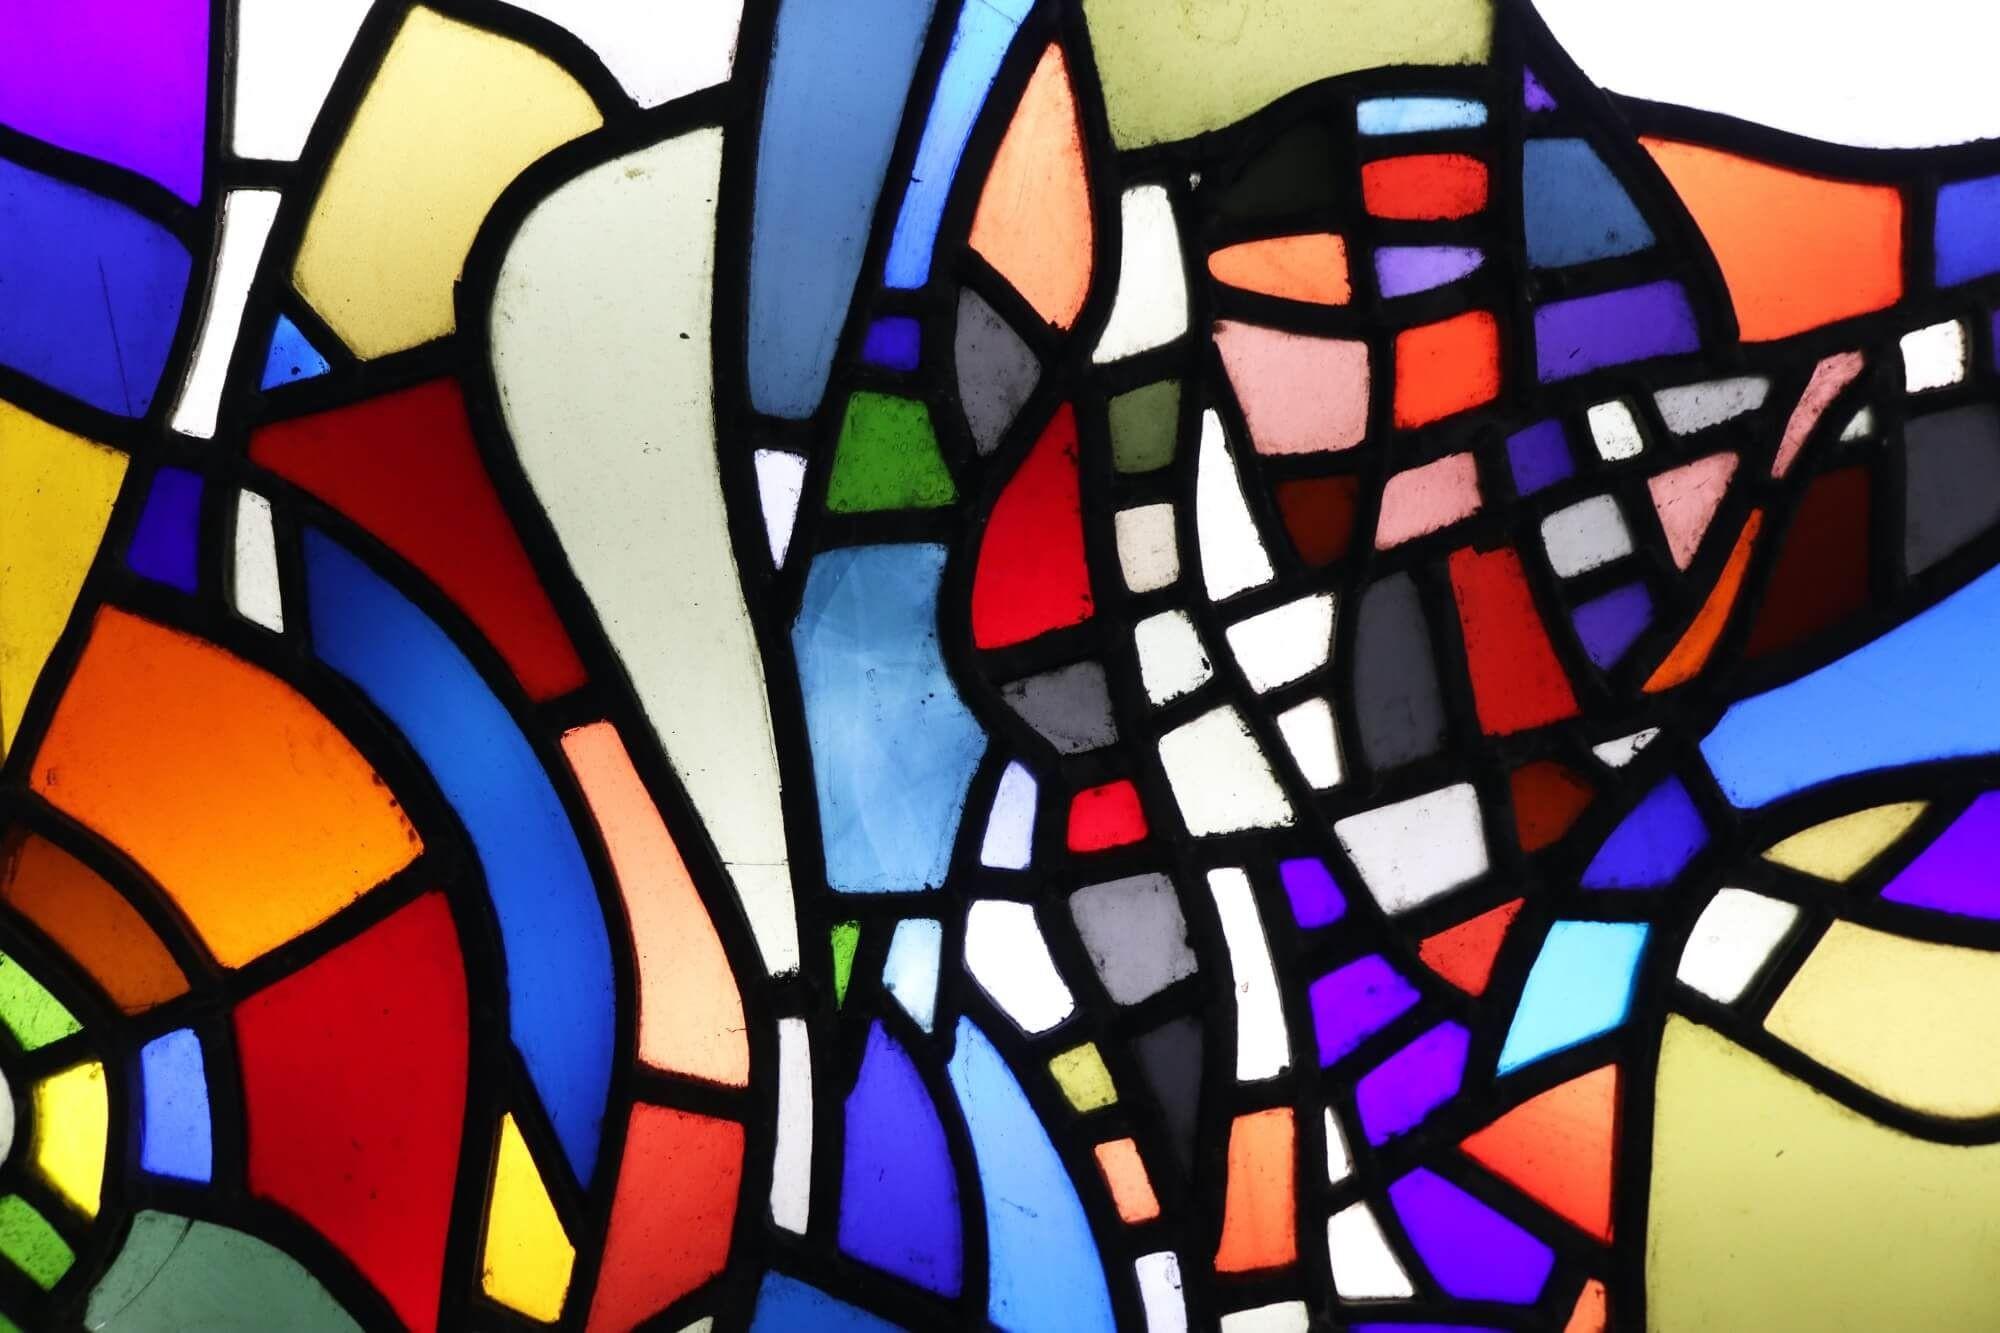 A multicoloured leaded glass window from the studio of British artist, Patrick Reyntiens (1925-2021). Attributed to the artist, this large stained glass panel depicts a vibrant, abstract style design. It is one of various stained glass panels we are